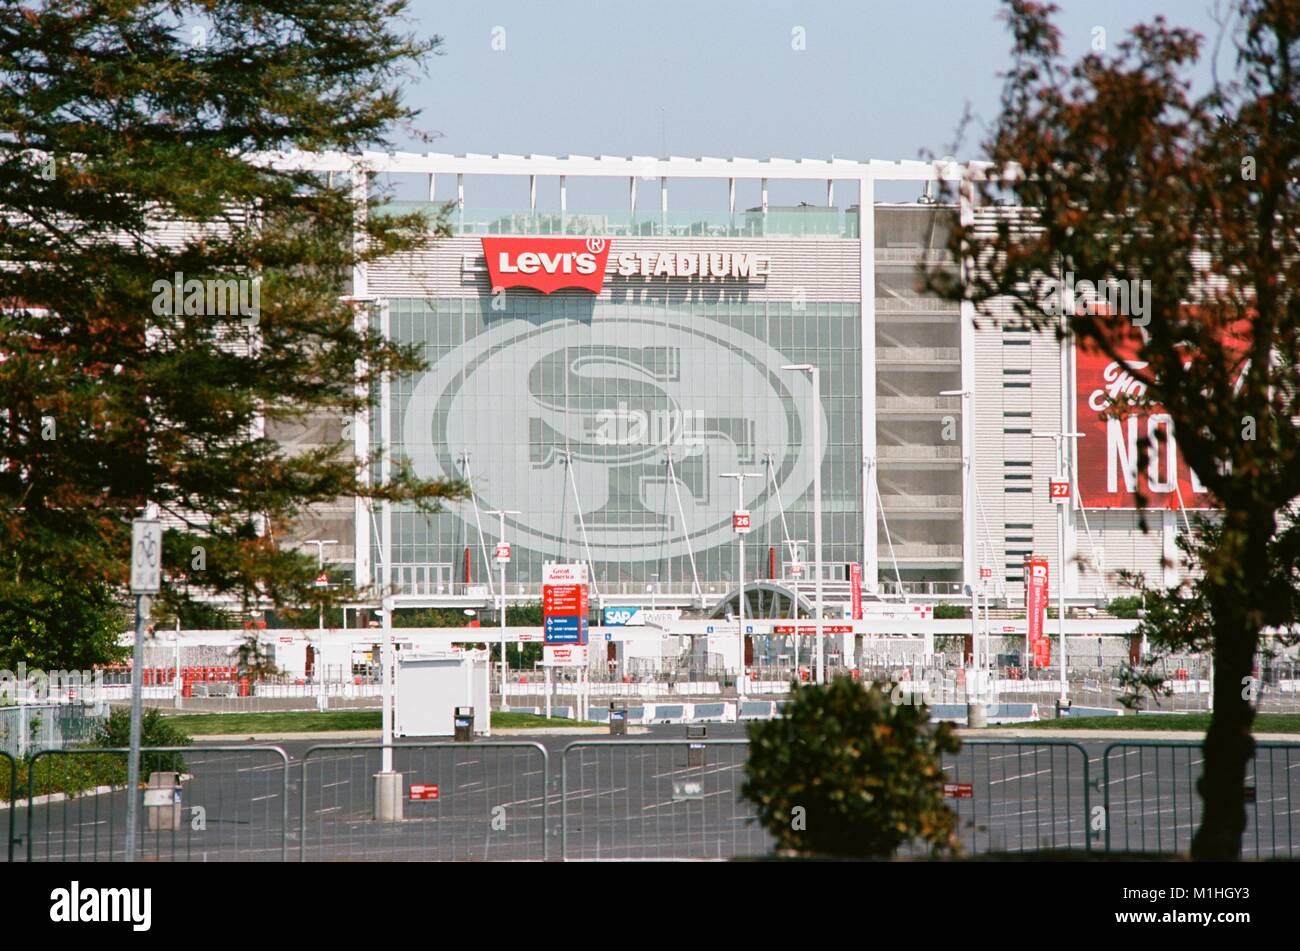 Side view of Levi's Stadium, home of the San Francisco 49ers football team, viewed through trees across a parking lot, in the Silicon Valley, Santa Clara, California, August 17, 2017. () Stock Photo